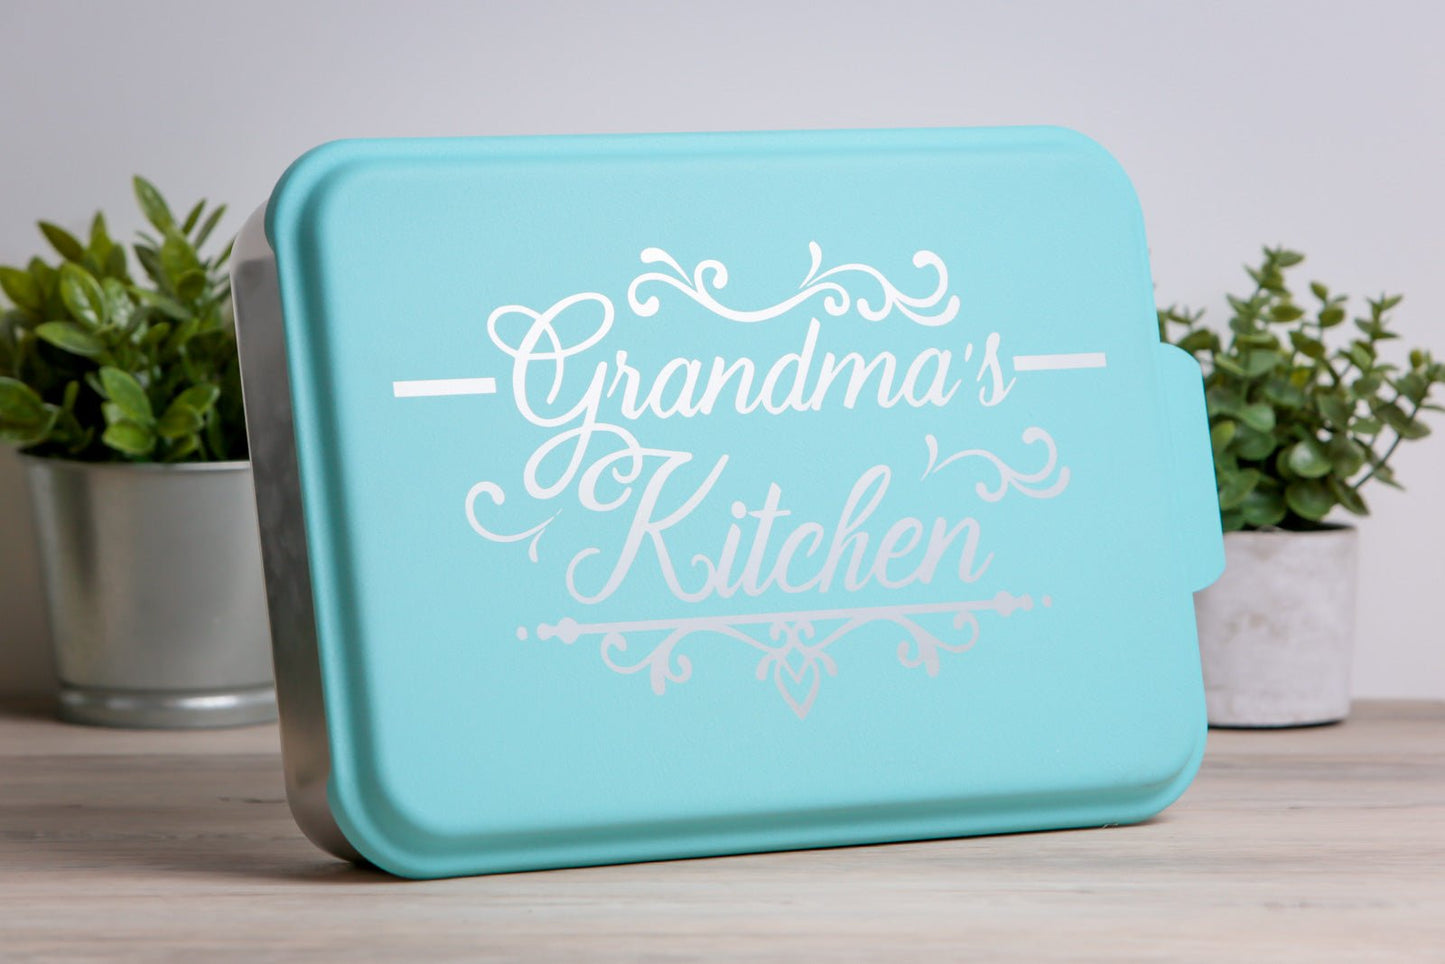 9 x 13 inch Cake Pan with Personalized Lid